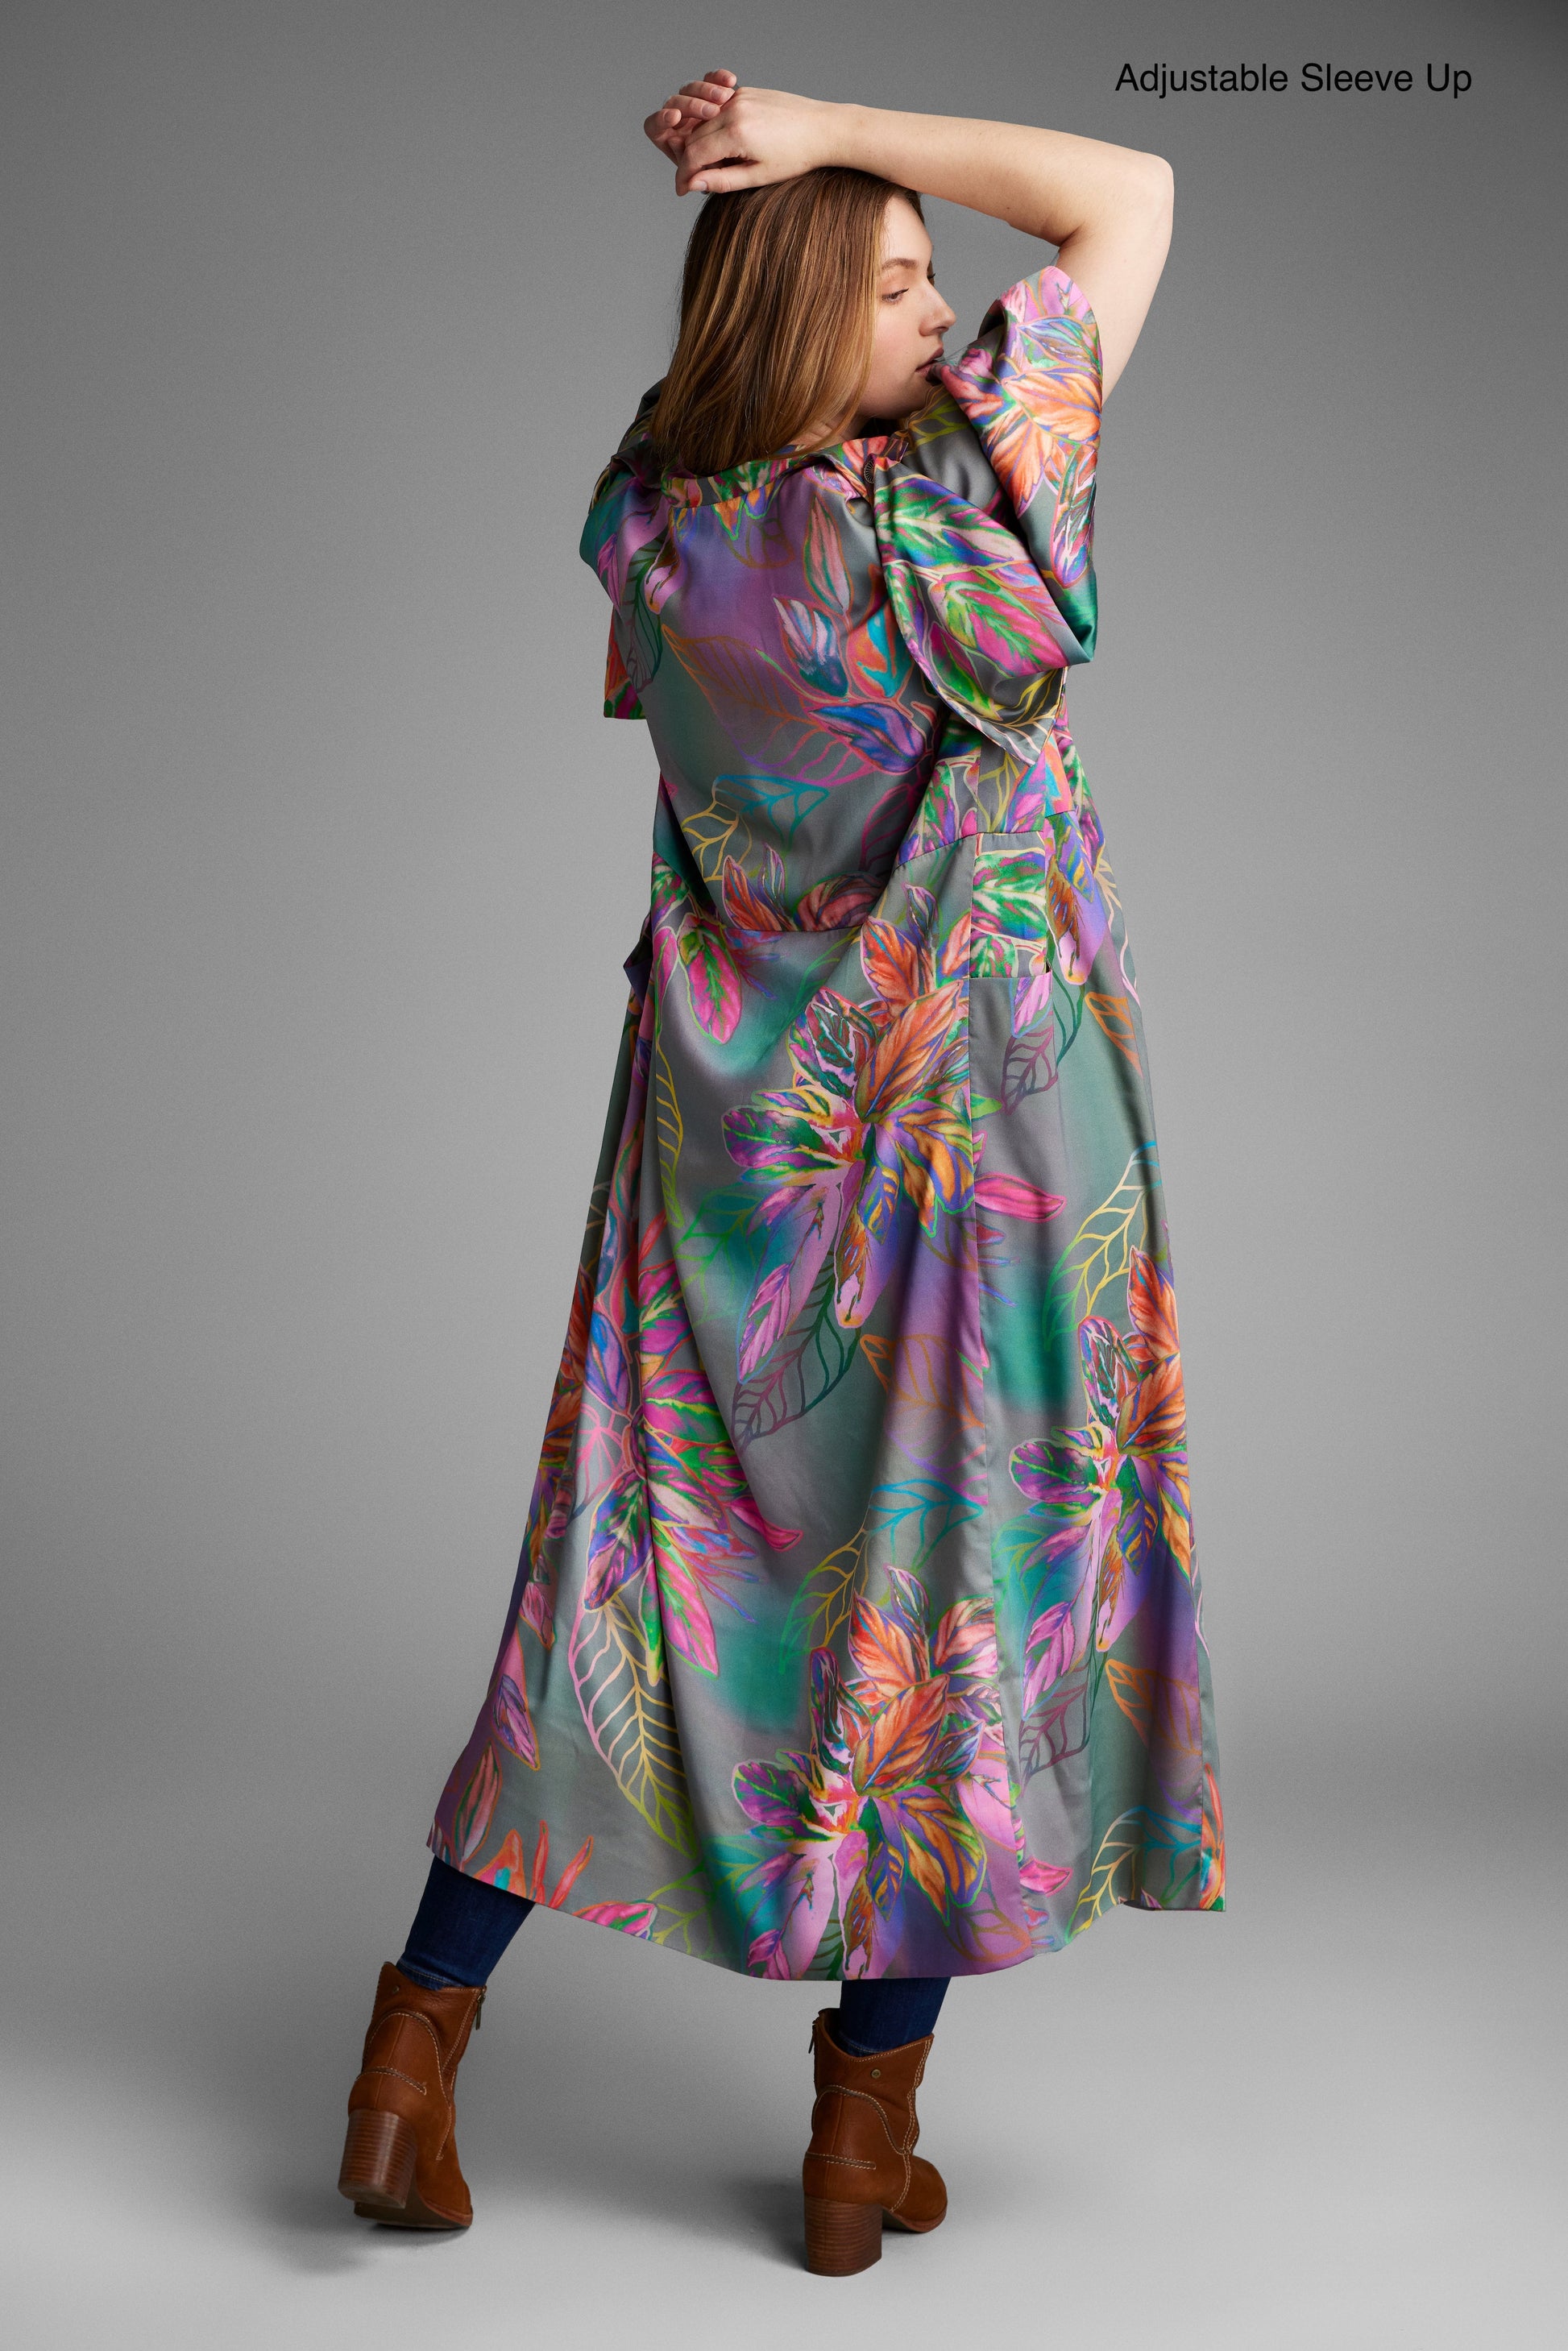 Back profile of woman modelling an all over tropical printed kimono duster made from recycled materials 3